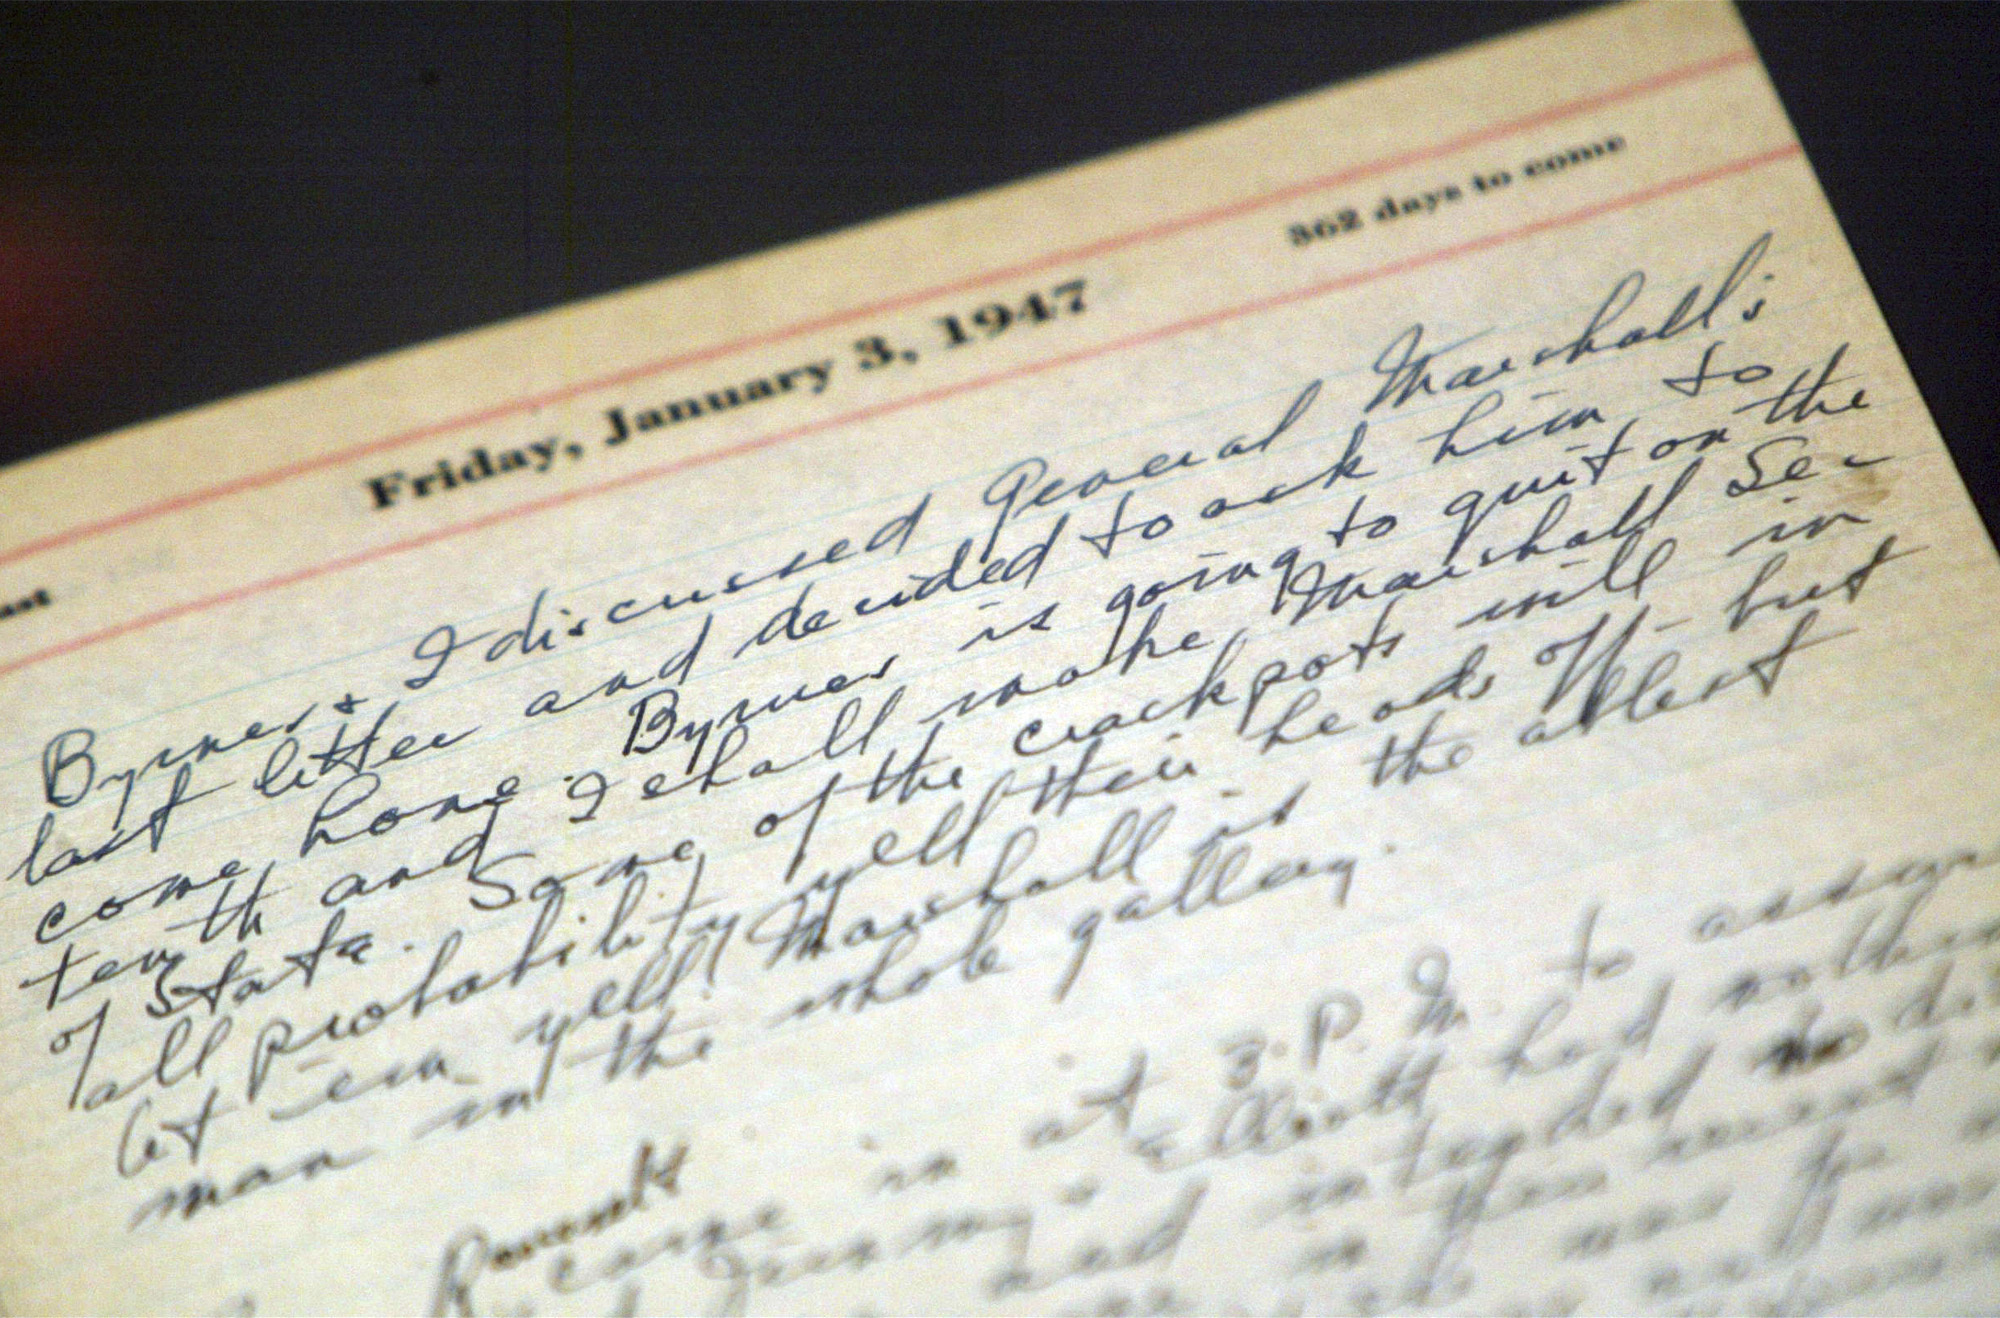 FILE - A portion of a page from a Harry Truman's 1947 presidential diary is shown at the National Archives in Washington, July 10, 2003. Presidents from George Washington to Joe Biden have kept presidential diaries. In them, they confide in themselves, express raw opinions, trace even the humdrum habits of their day and offer insight-on-the-fly on monumental decisions of their time. It's where they may also spill secrets they shouldn't. (AP Photo/Rick Bowmer)